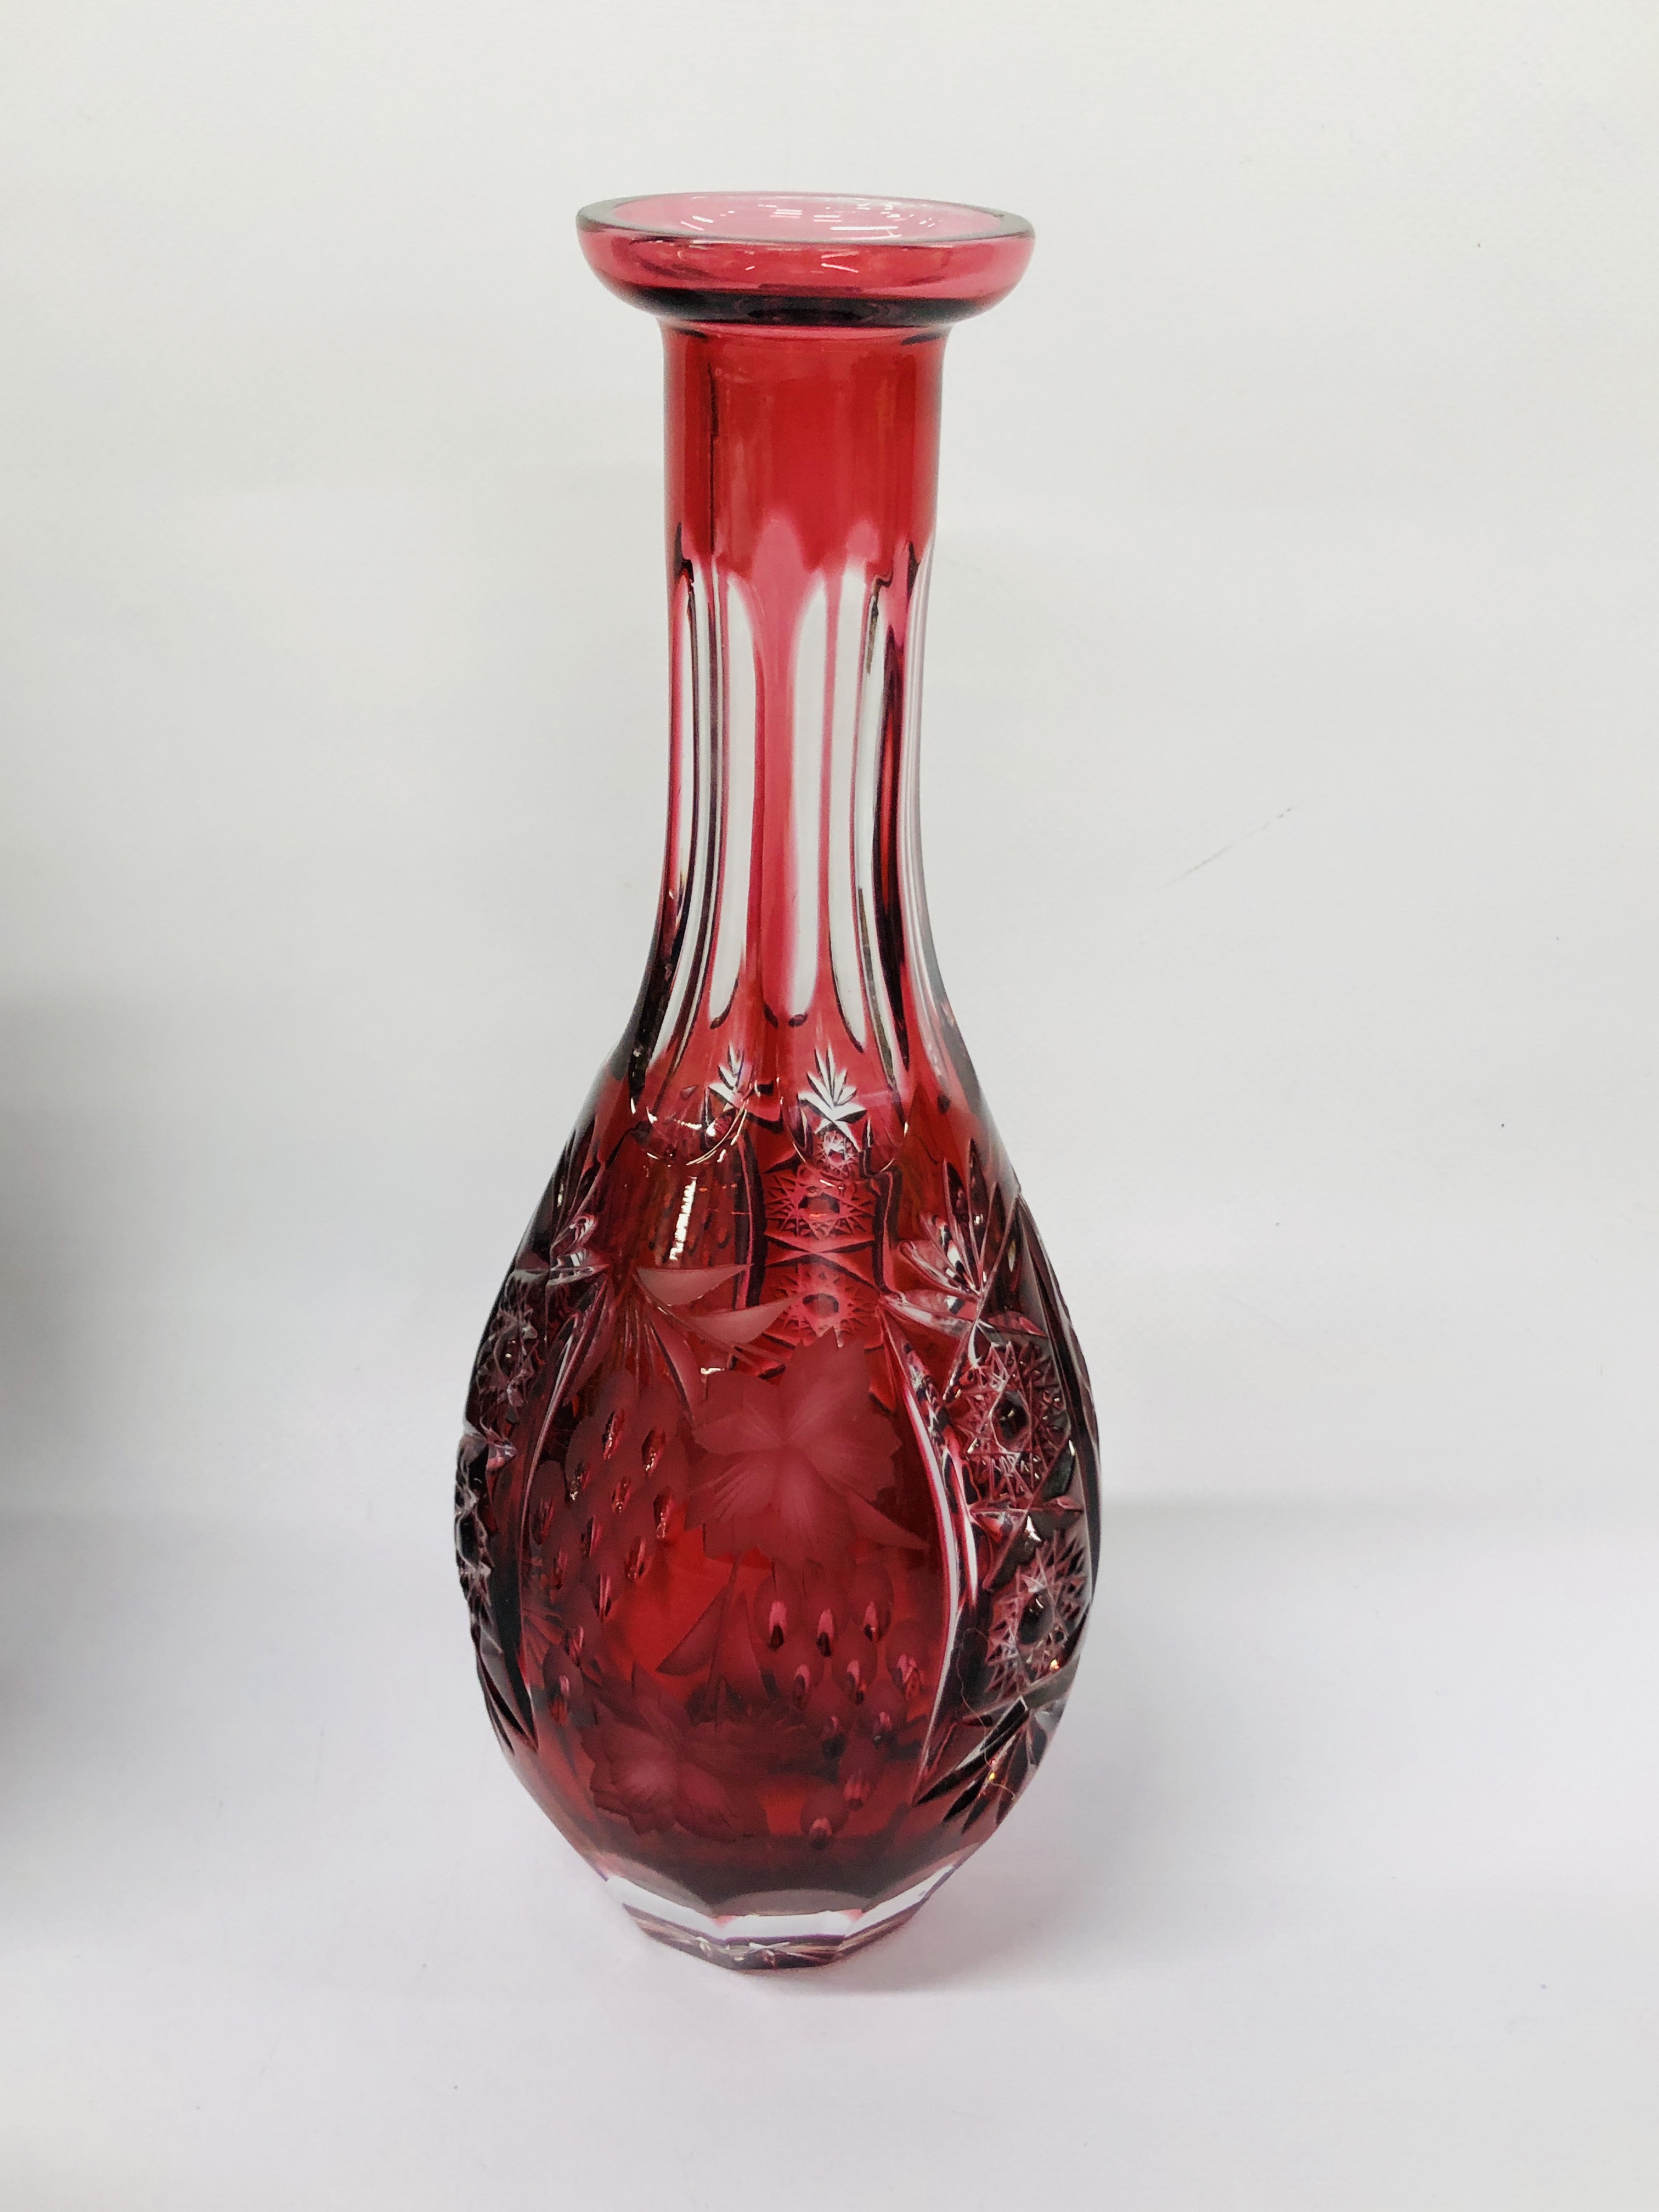 A COLLECTION OF ART GLASS PIECES TO INCL MURANO VASE, BODA SWEDISH GLOBE, BOHEMIA GLASS DECANTER, - Image 2 of 18